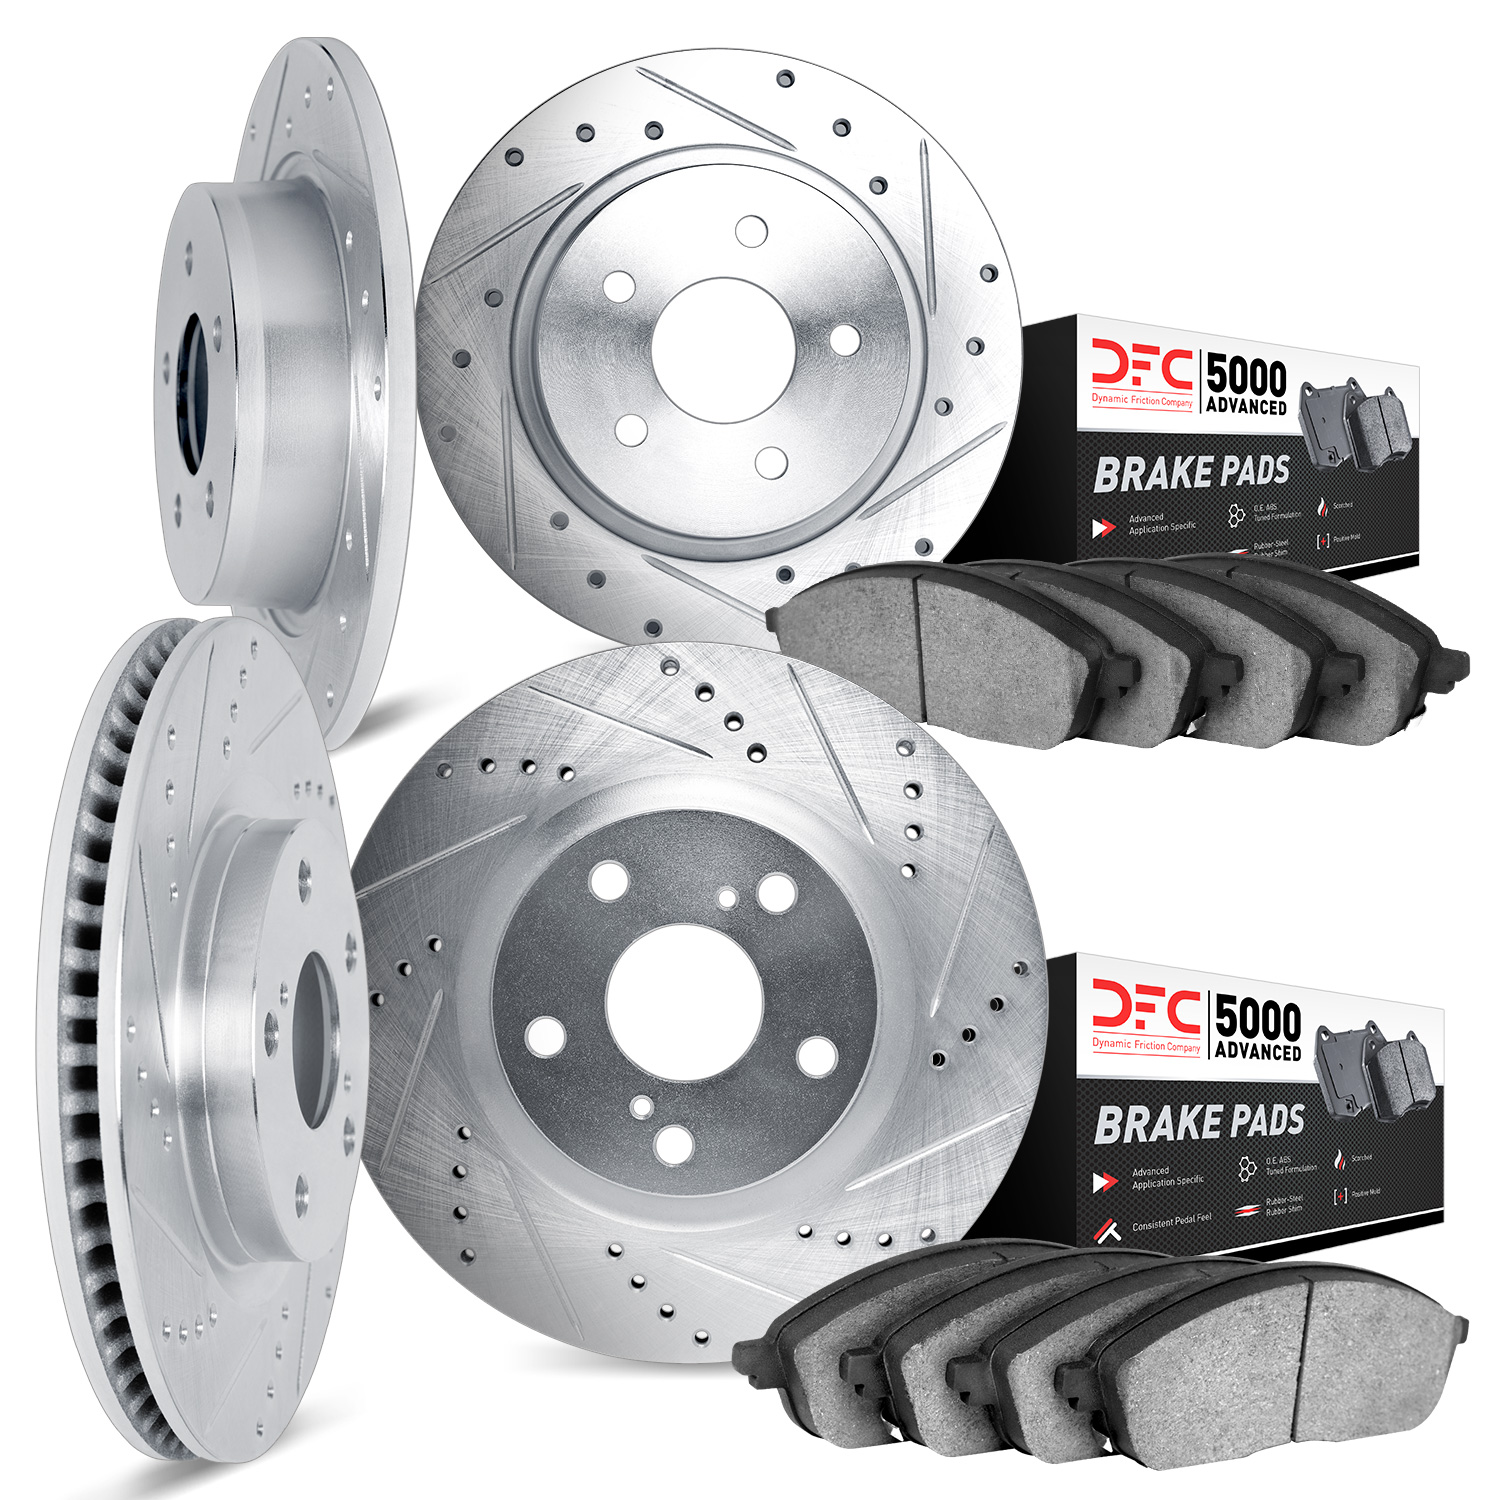 7504-59048 Drilled/Slotted Brake Rotors w/5000 Advanced Brake Pads Kit [Silver], 2001-2002 Acura/Honda, Position: Front and Rear